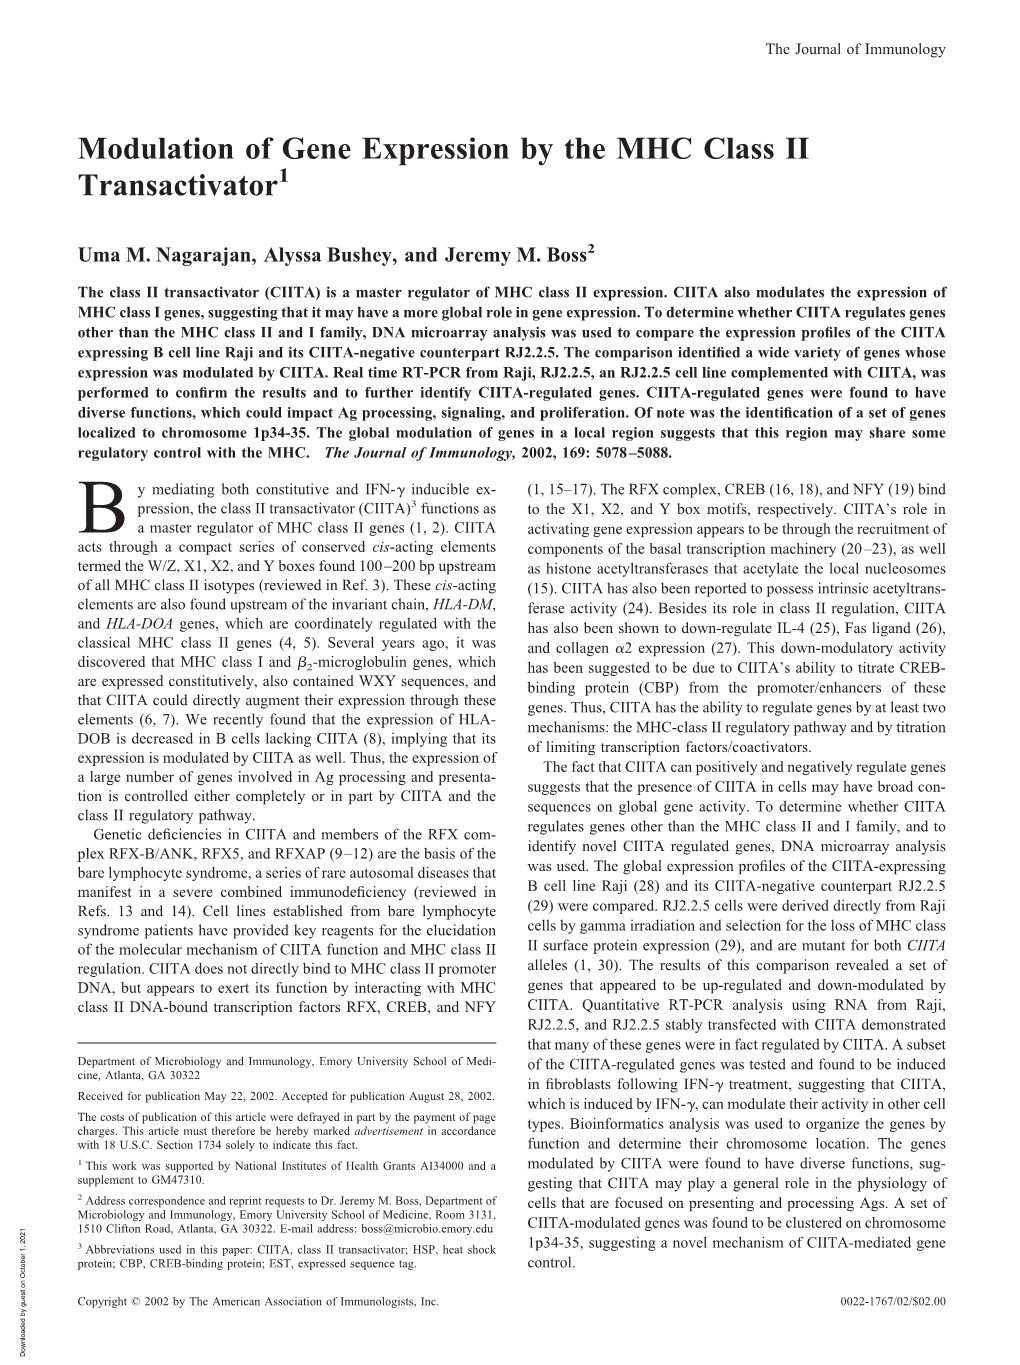 Class II Transactivator Modulation of Gene Expression by The